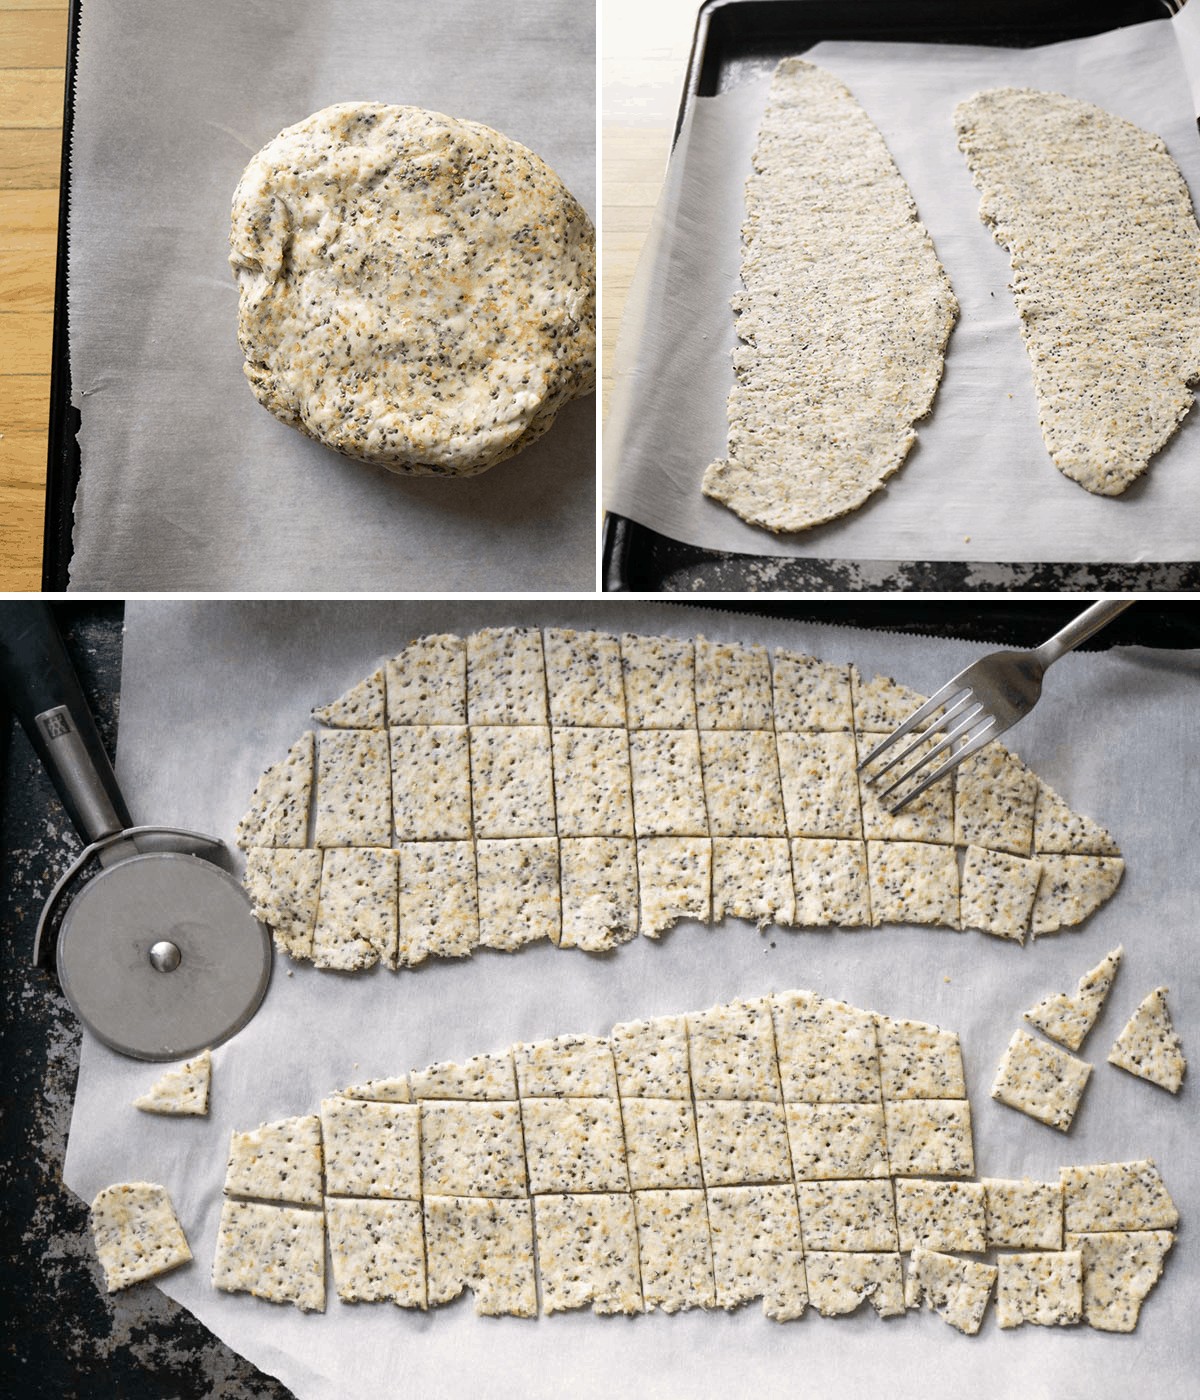 step by step process photo collage for sourdough crackers. 1. Dough. 2. Roll it out. 3. Slice into squares and prick with fork